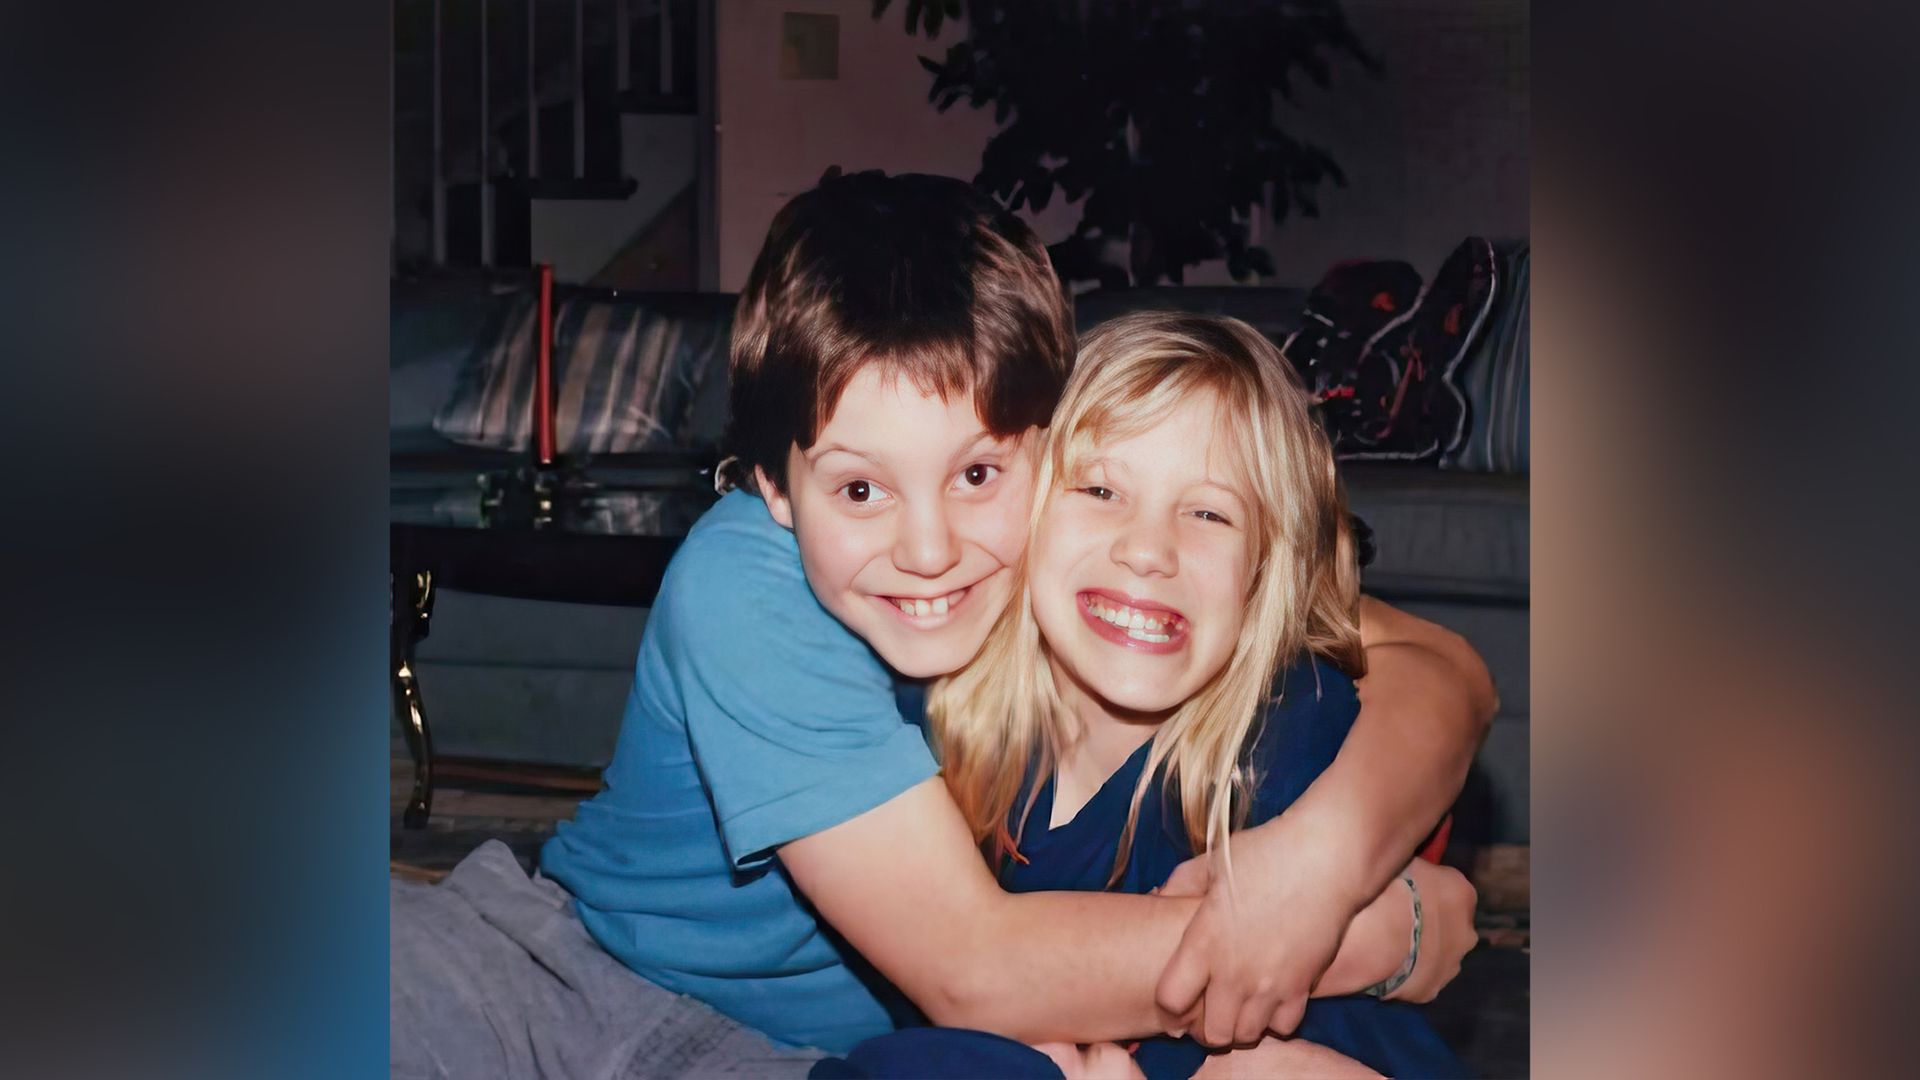 Katee Sackhoff and her brother in their childhood